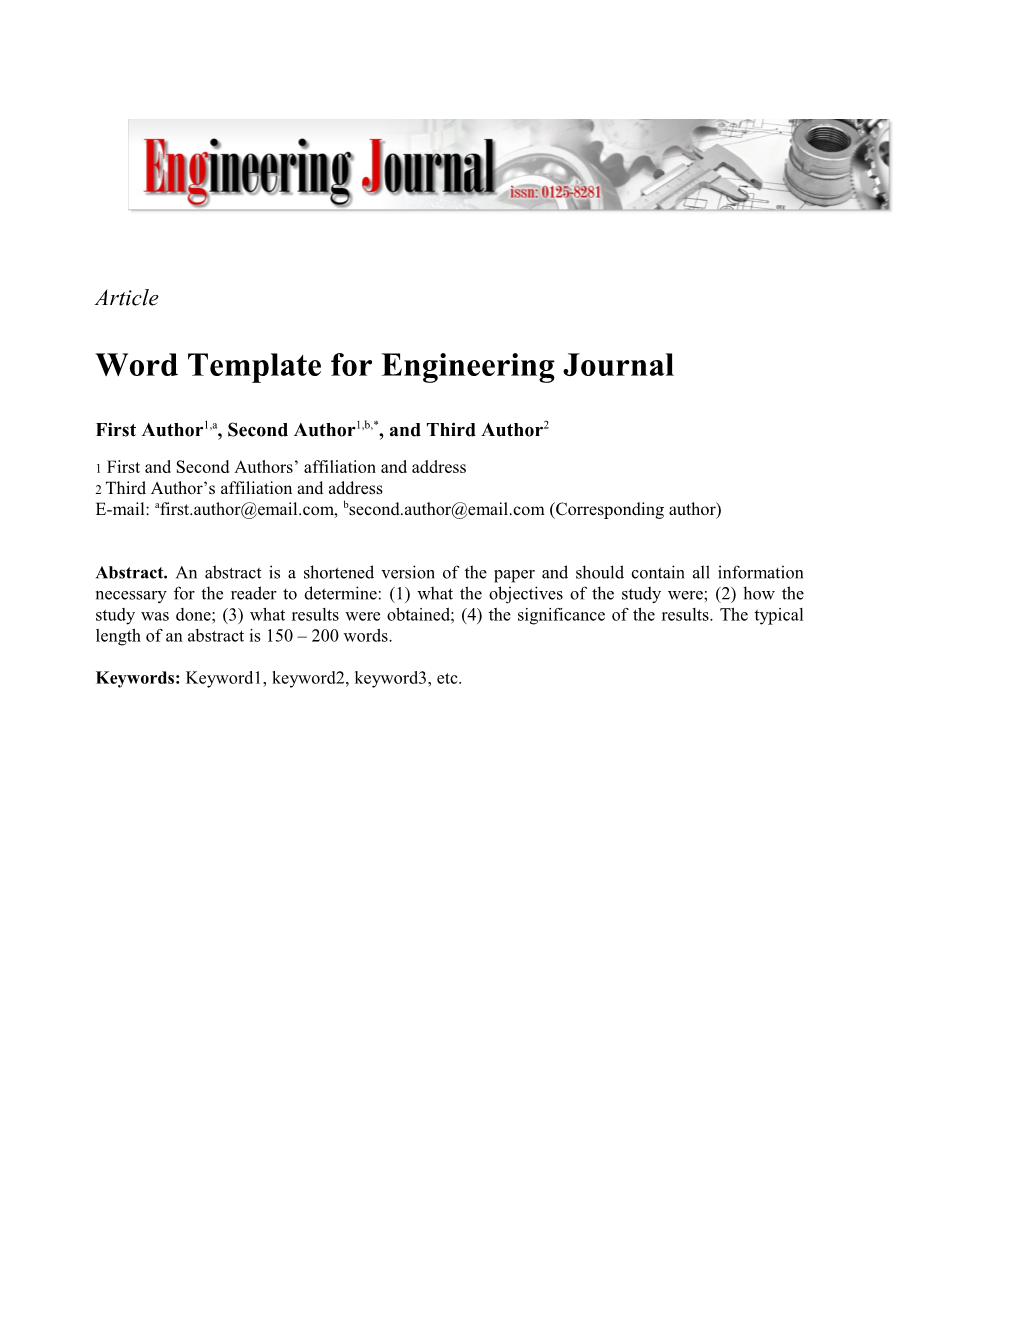 Word Template for Engineering Journal